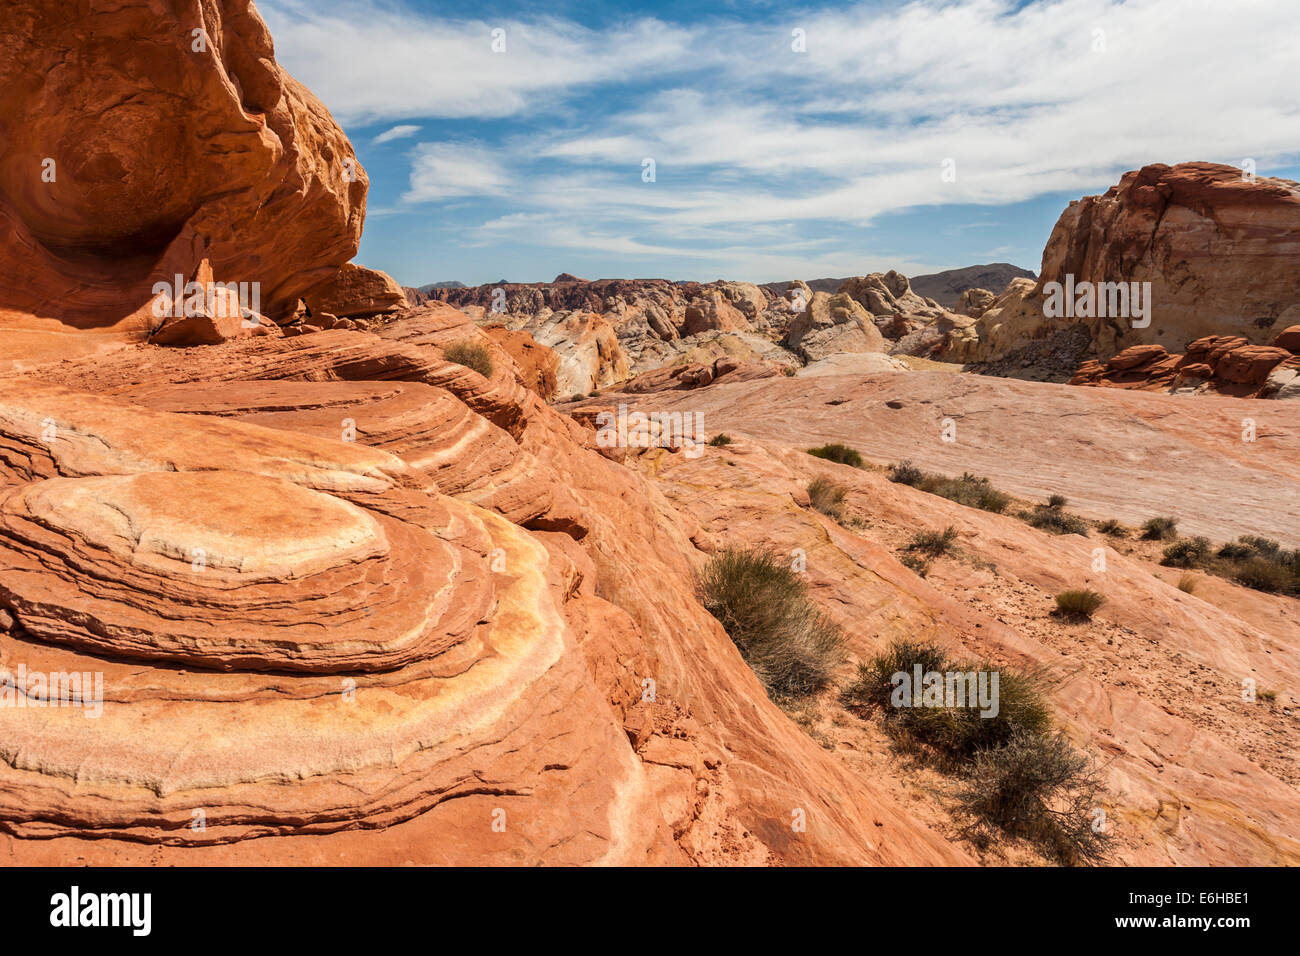 Rock formations and desert vegetation in Valley of Fire State Park near Overton, Nevada Stock Photo